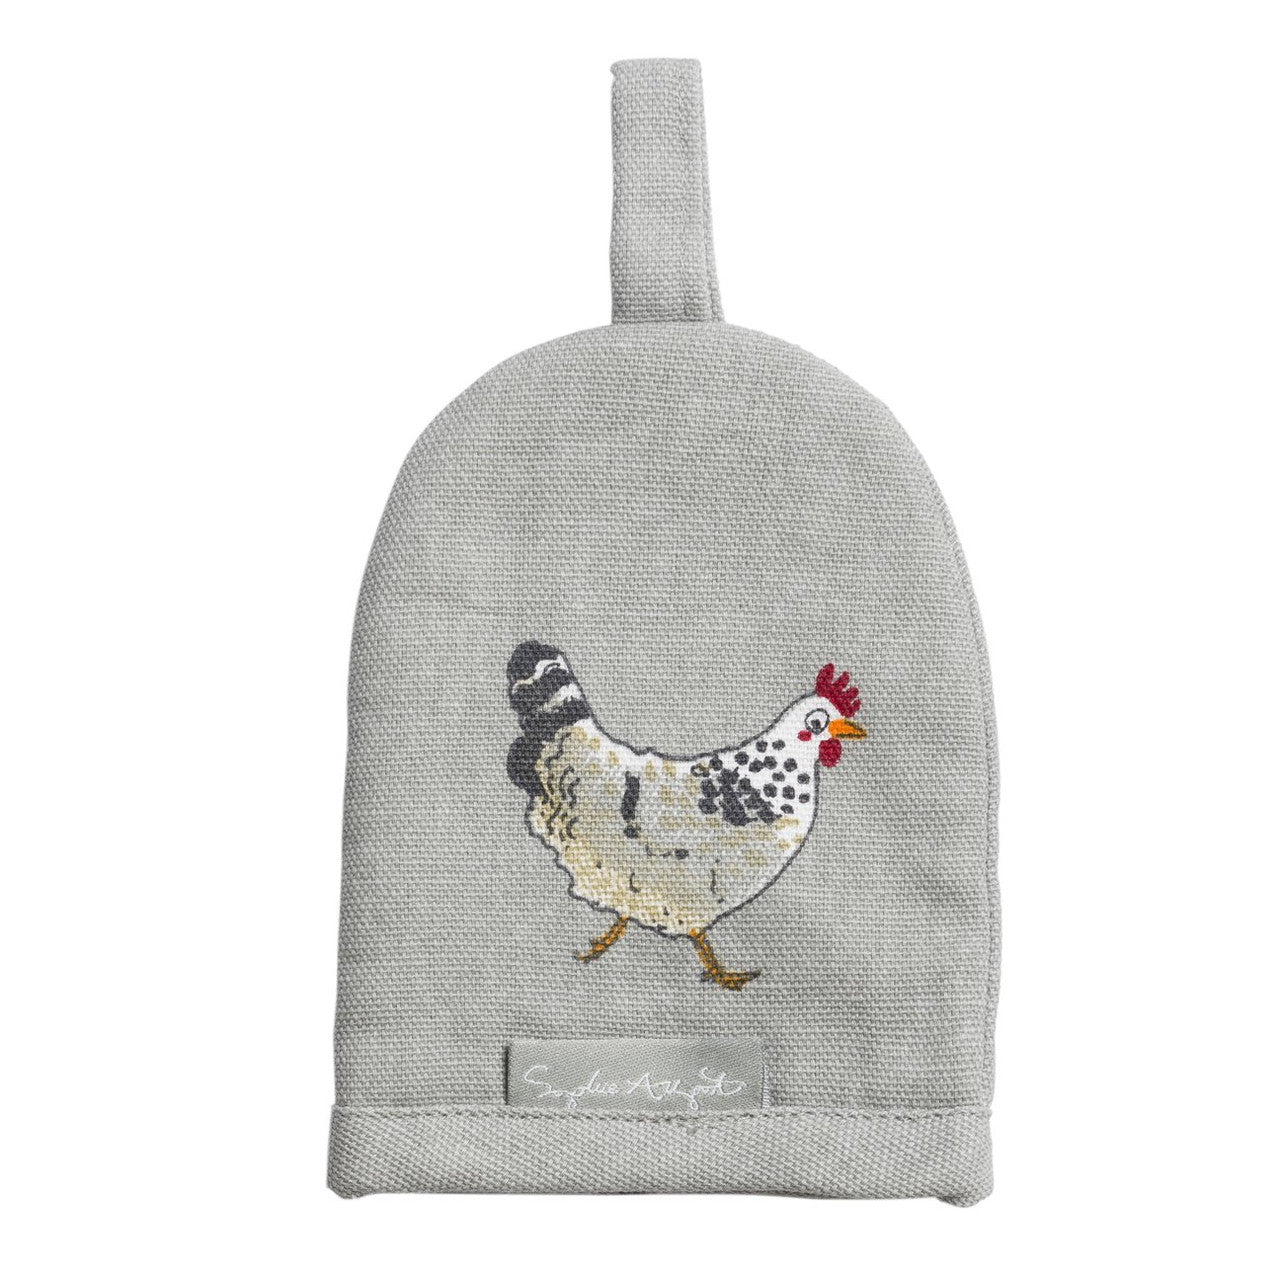 Chicken Egg Cosy by Sophie Allport